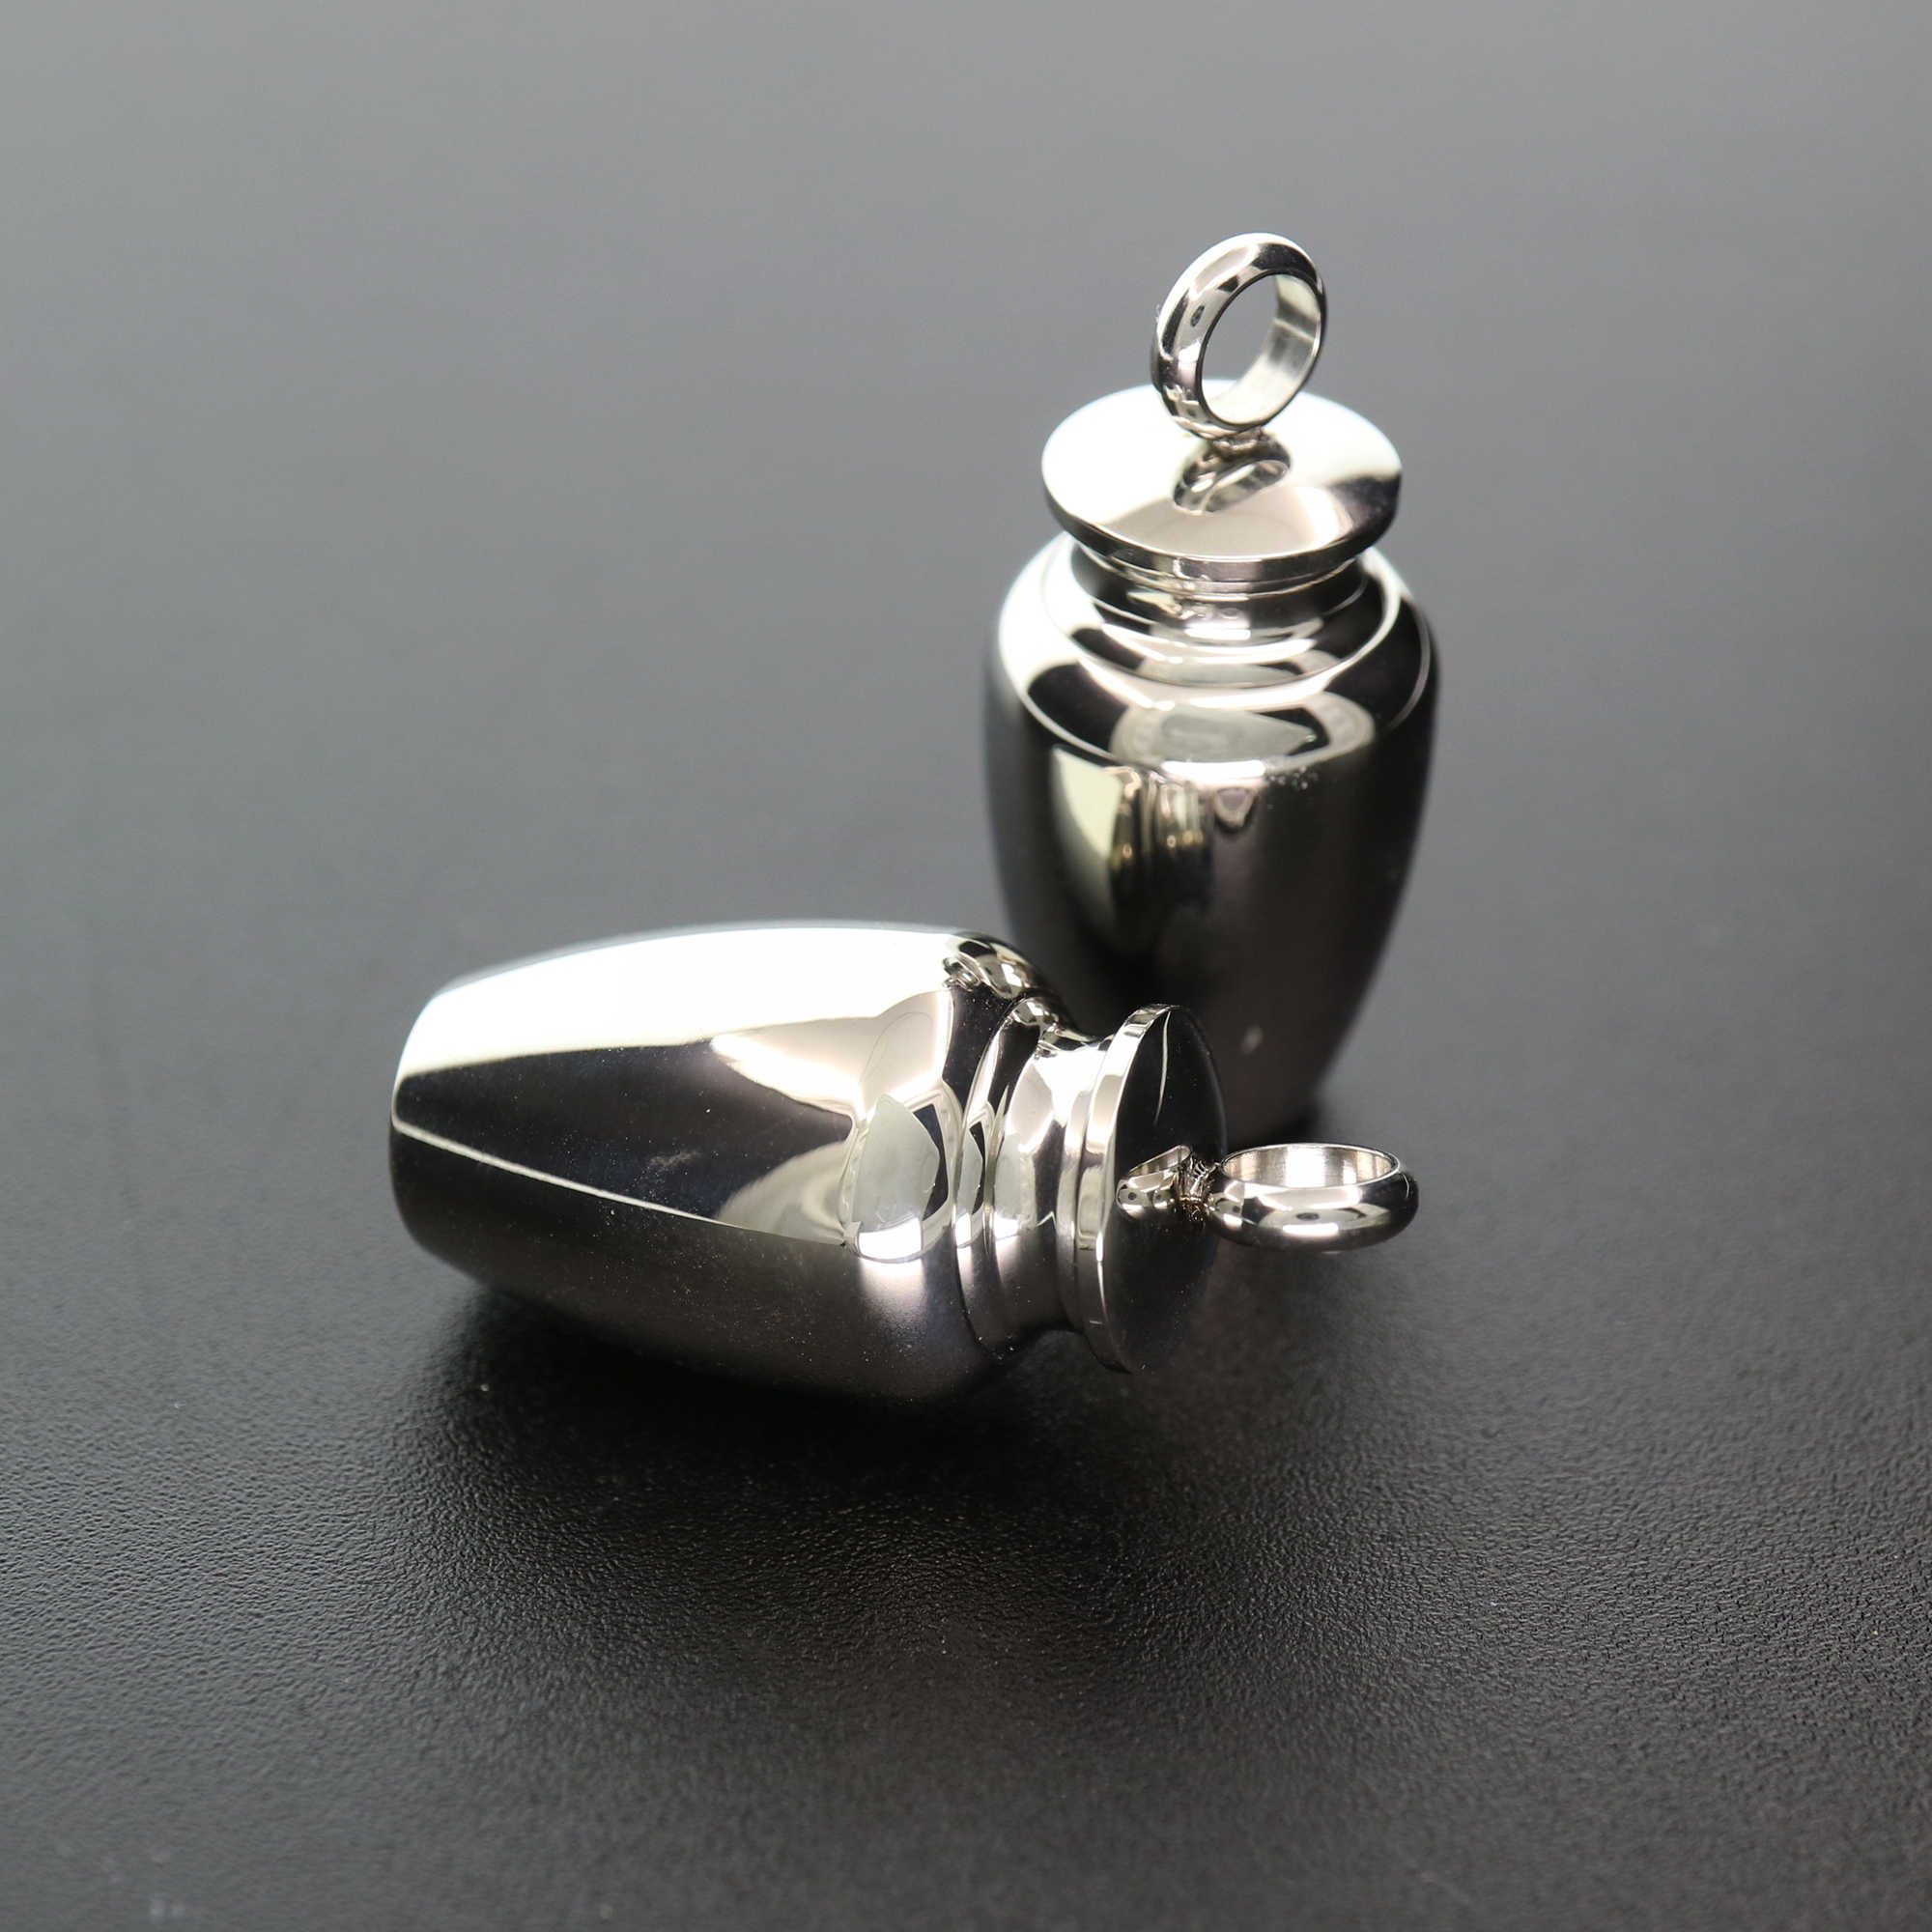 1Pcs 16x34MM blank stainless steel cremation bottle perfume holder ash wish vial pendant canister memorial gift name engraving 1190011 - Click Image to Close